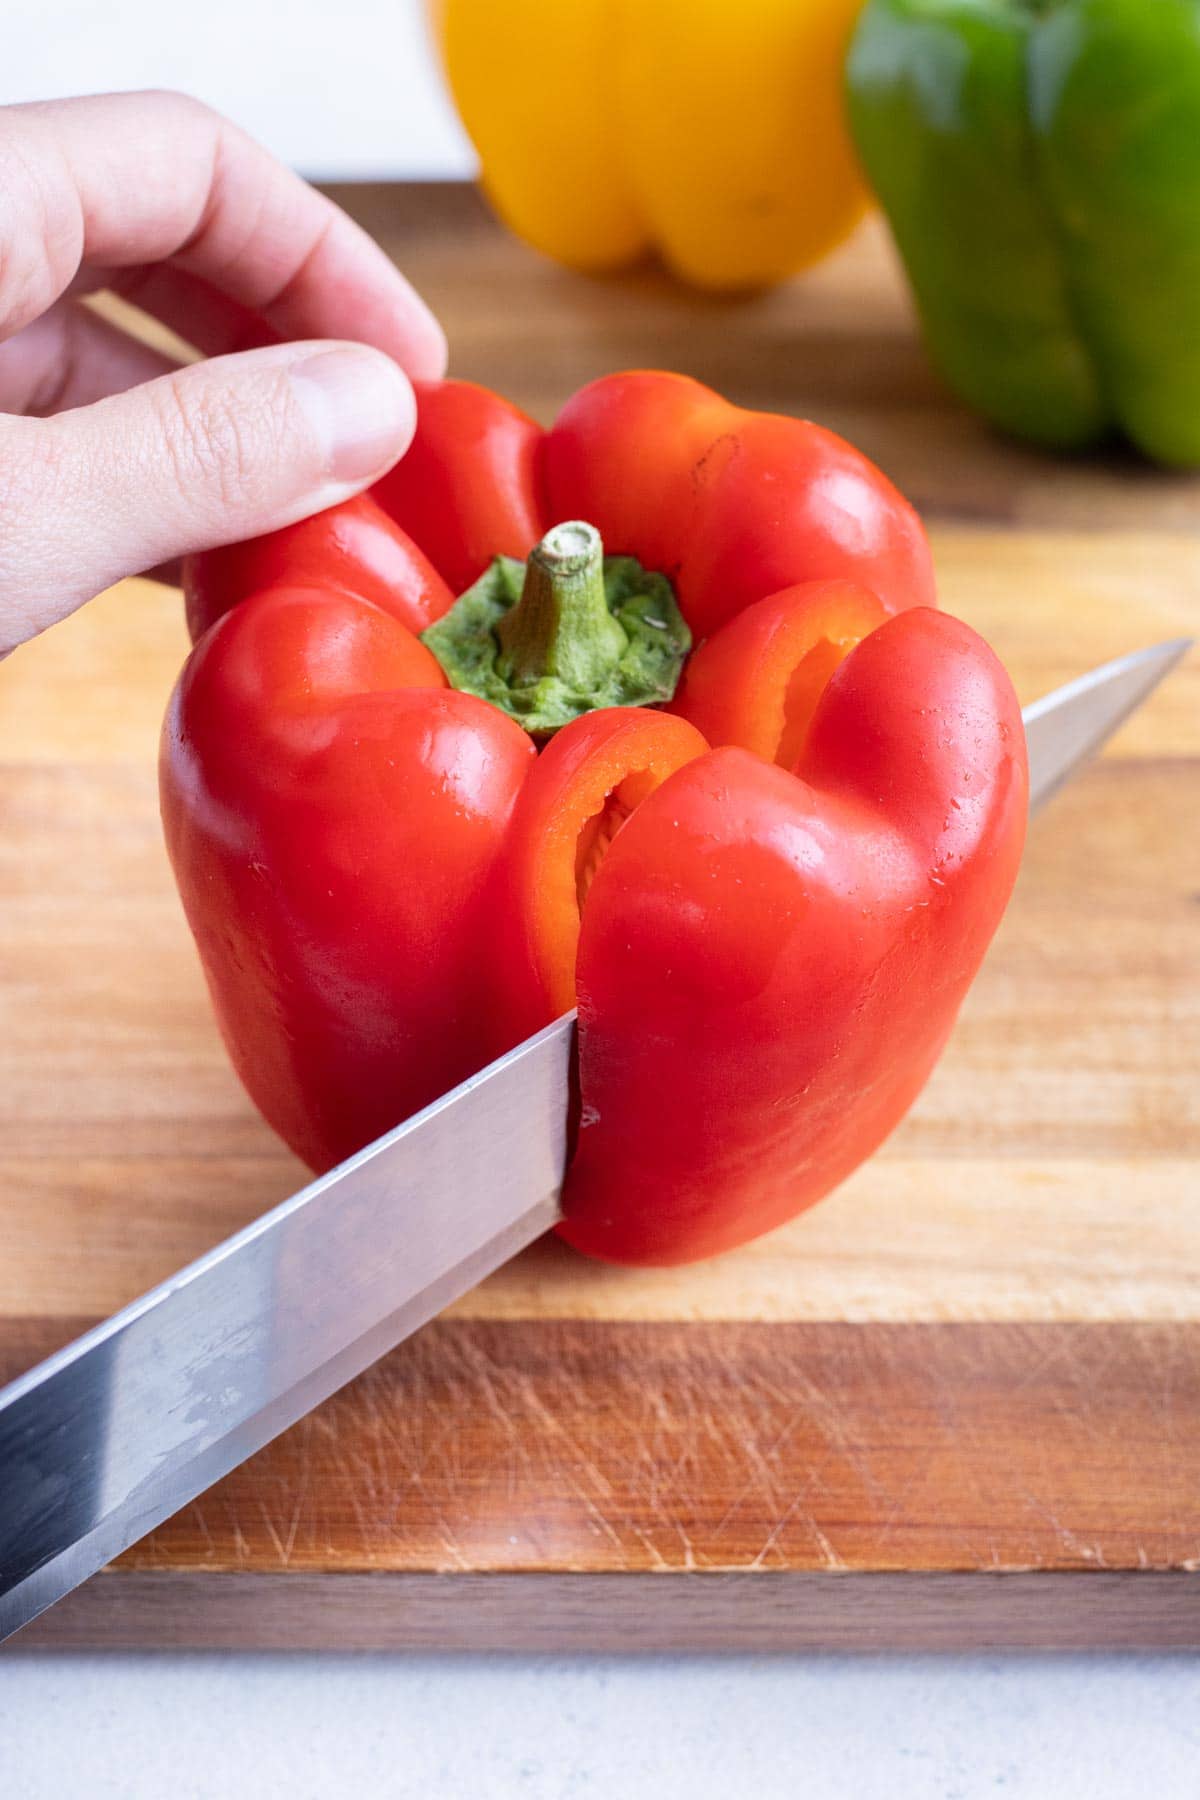 The bell peppers is cut down the sides surrounding the stem.